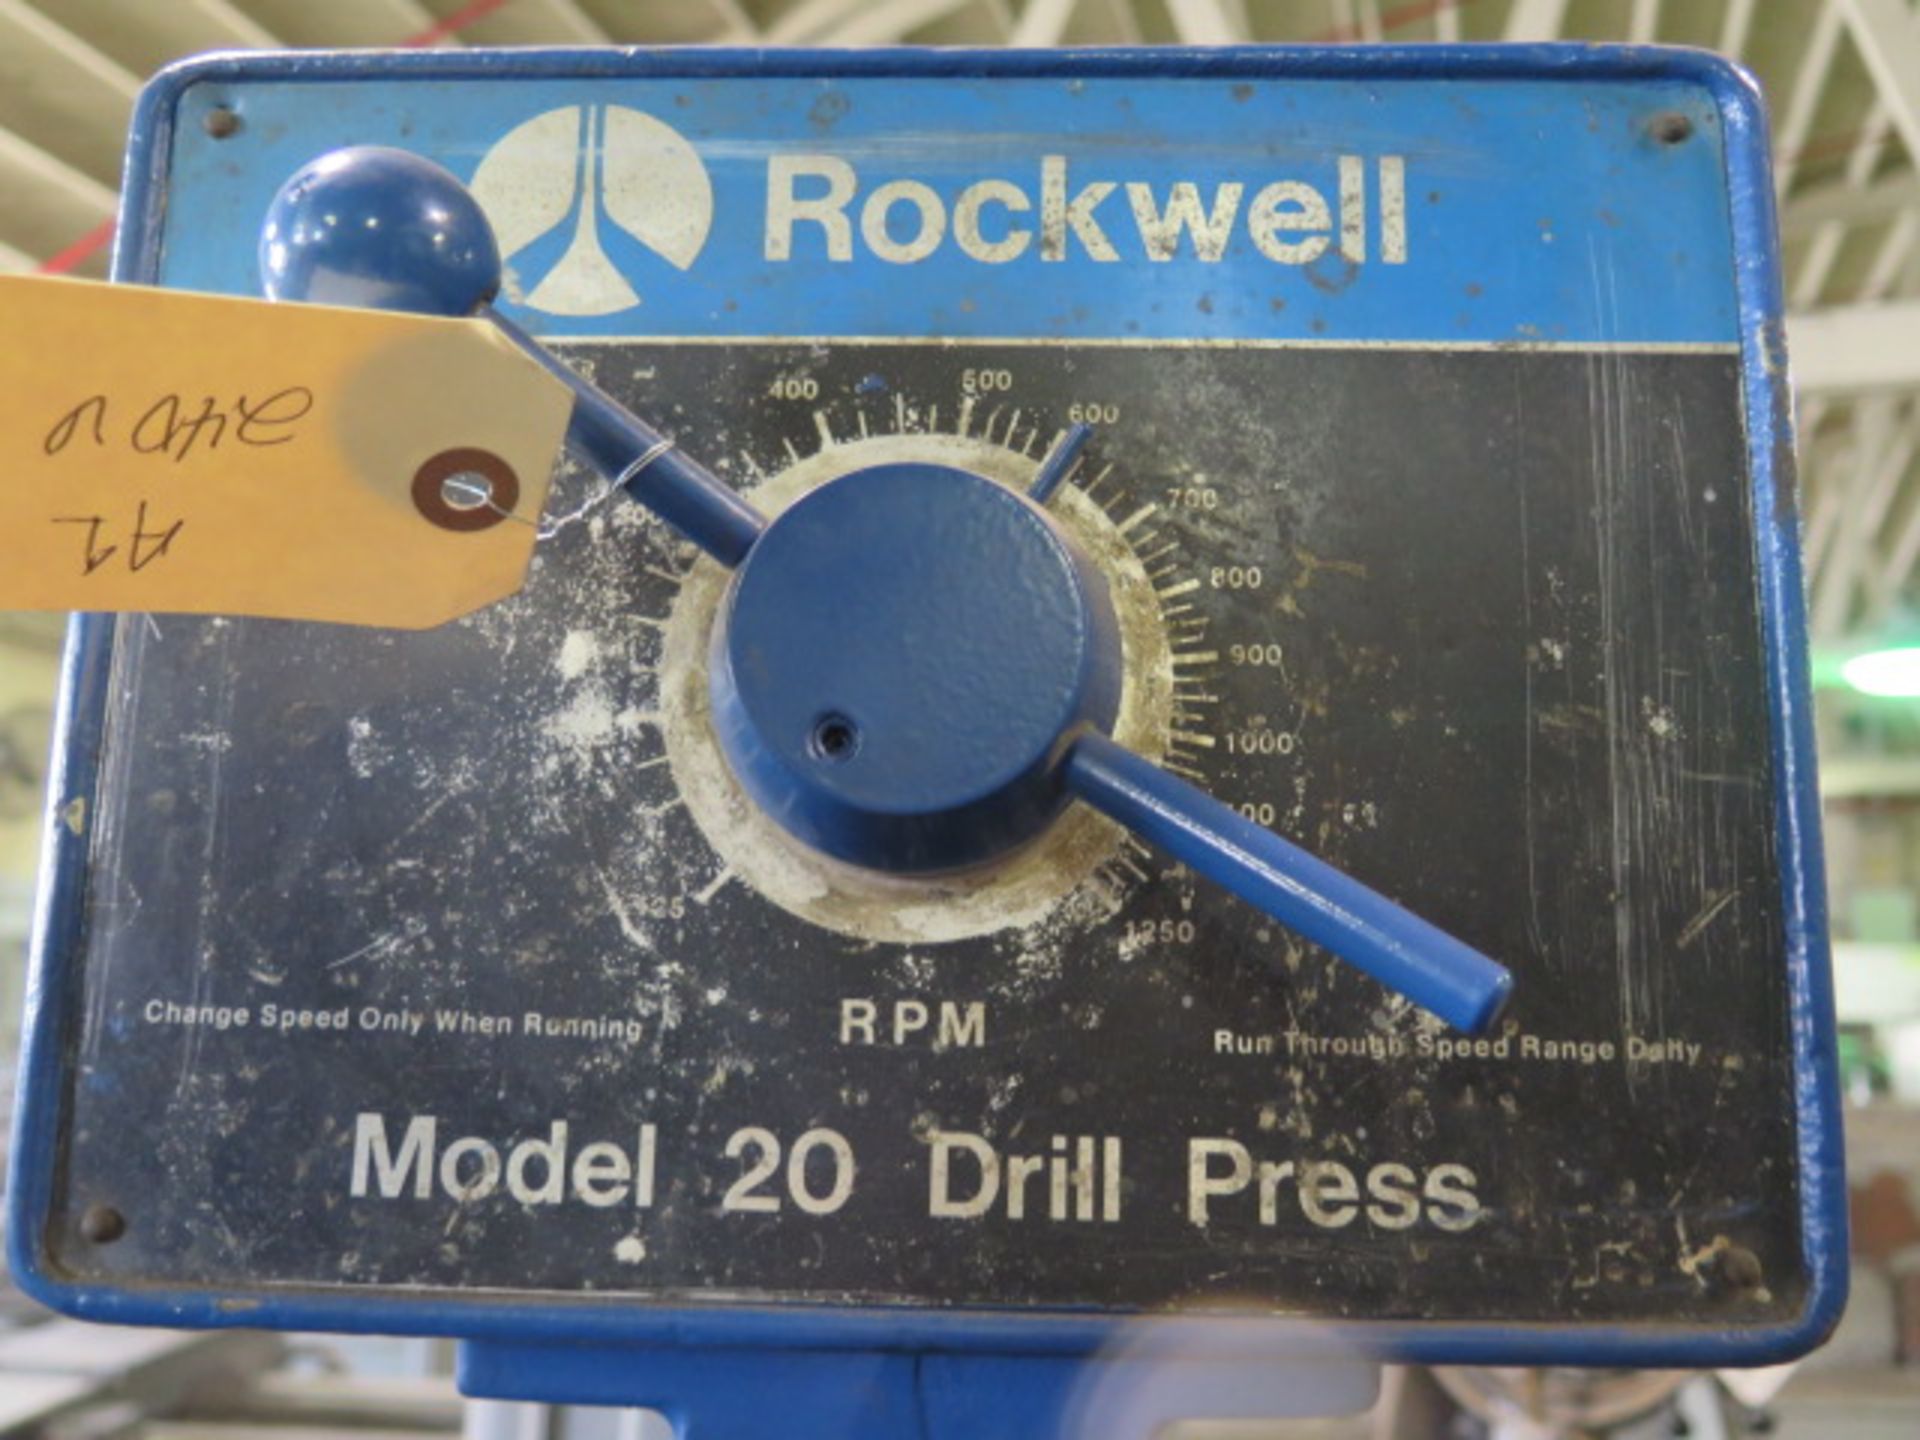 Rockwell mdl. 20 Variable Speed Pedestal Drill Press (SOLD AS-IS - NO WARRANTY) - Image 5 of 5